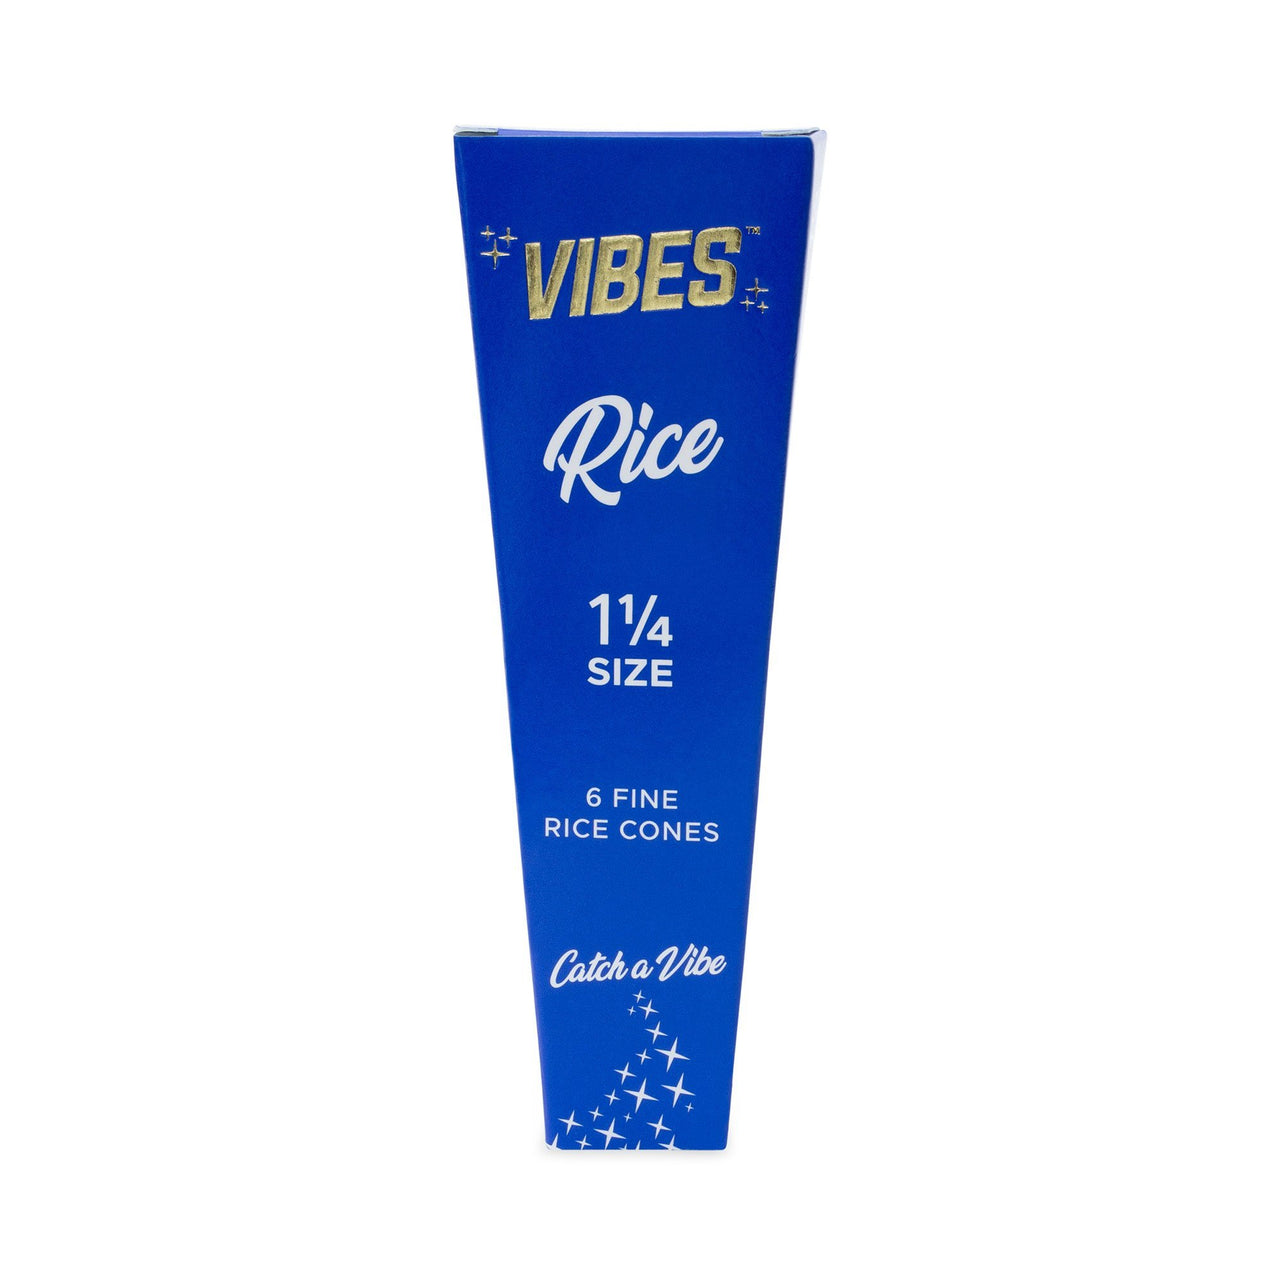 Vibes 1 1/4in Cone Packs